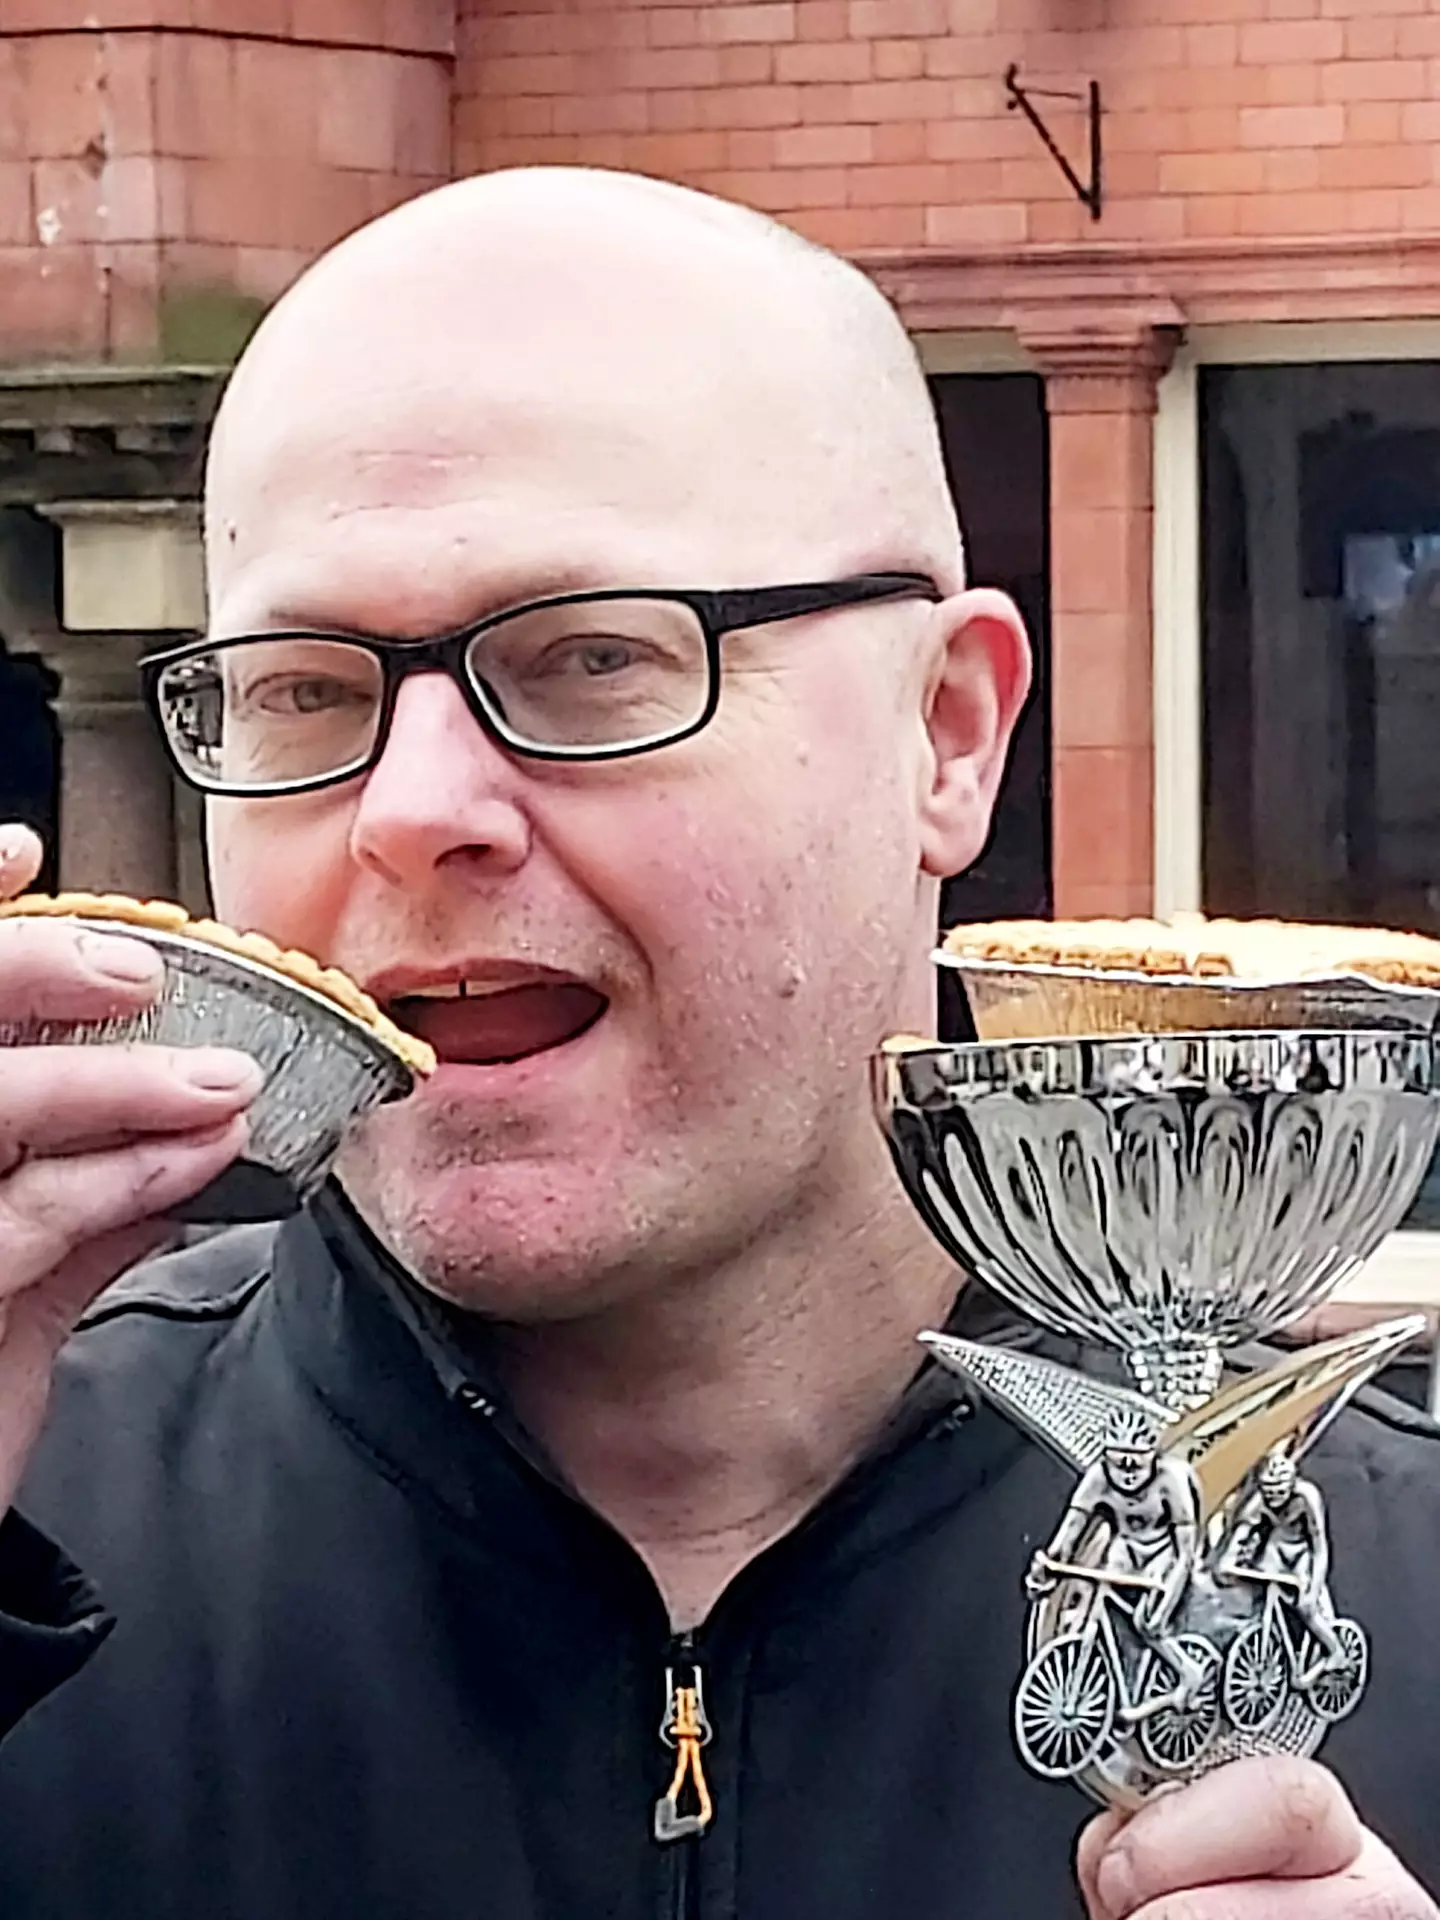 Barry is the three-time world pie-eating champion.